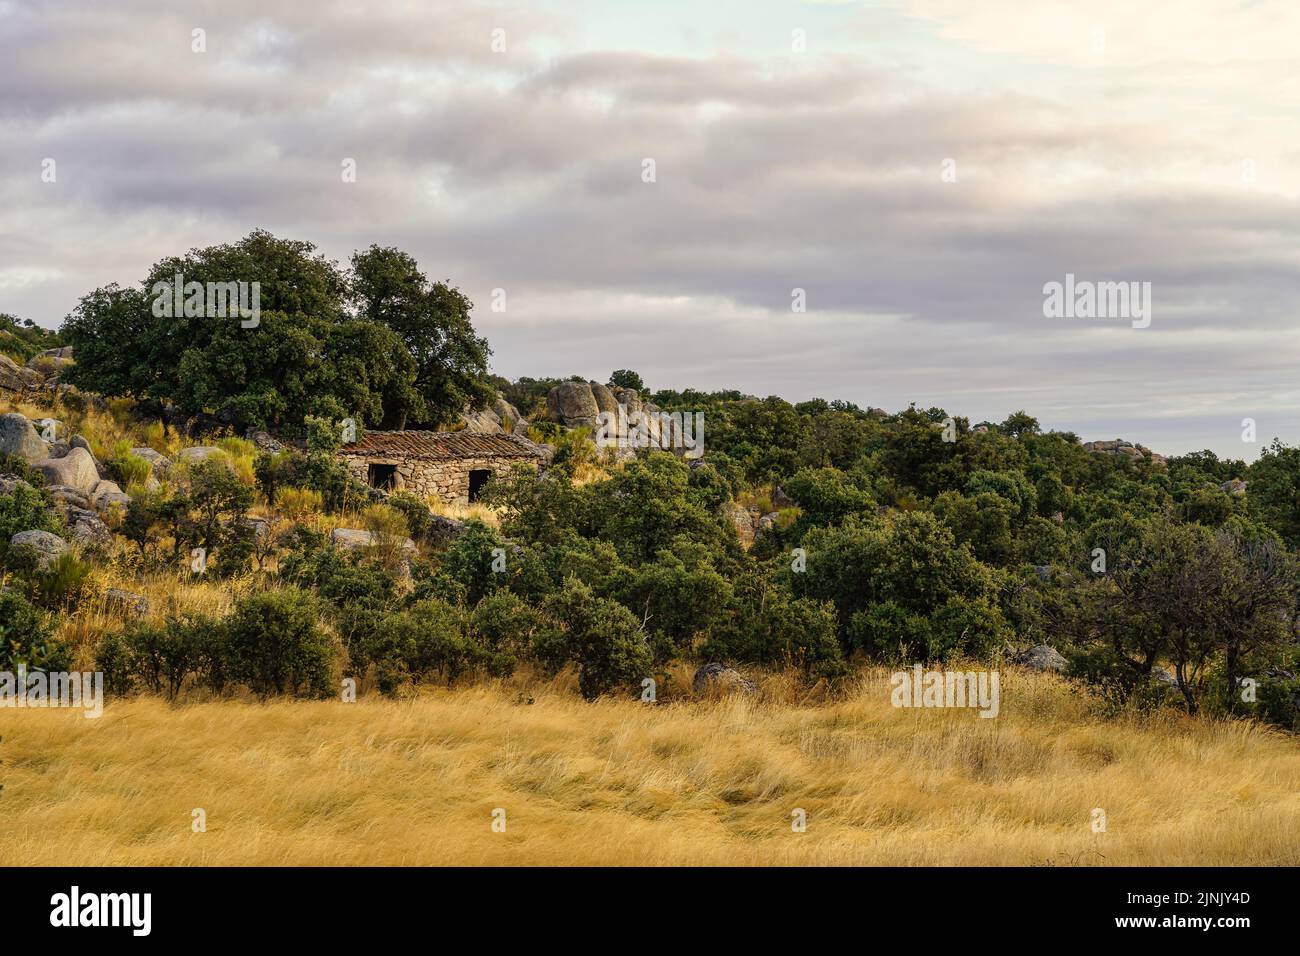 Small refuge house in the Mediterranean countryside. Stock Photo